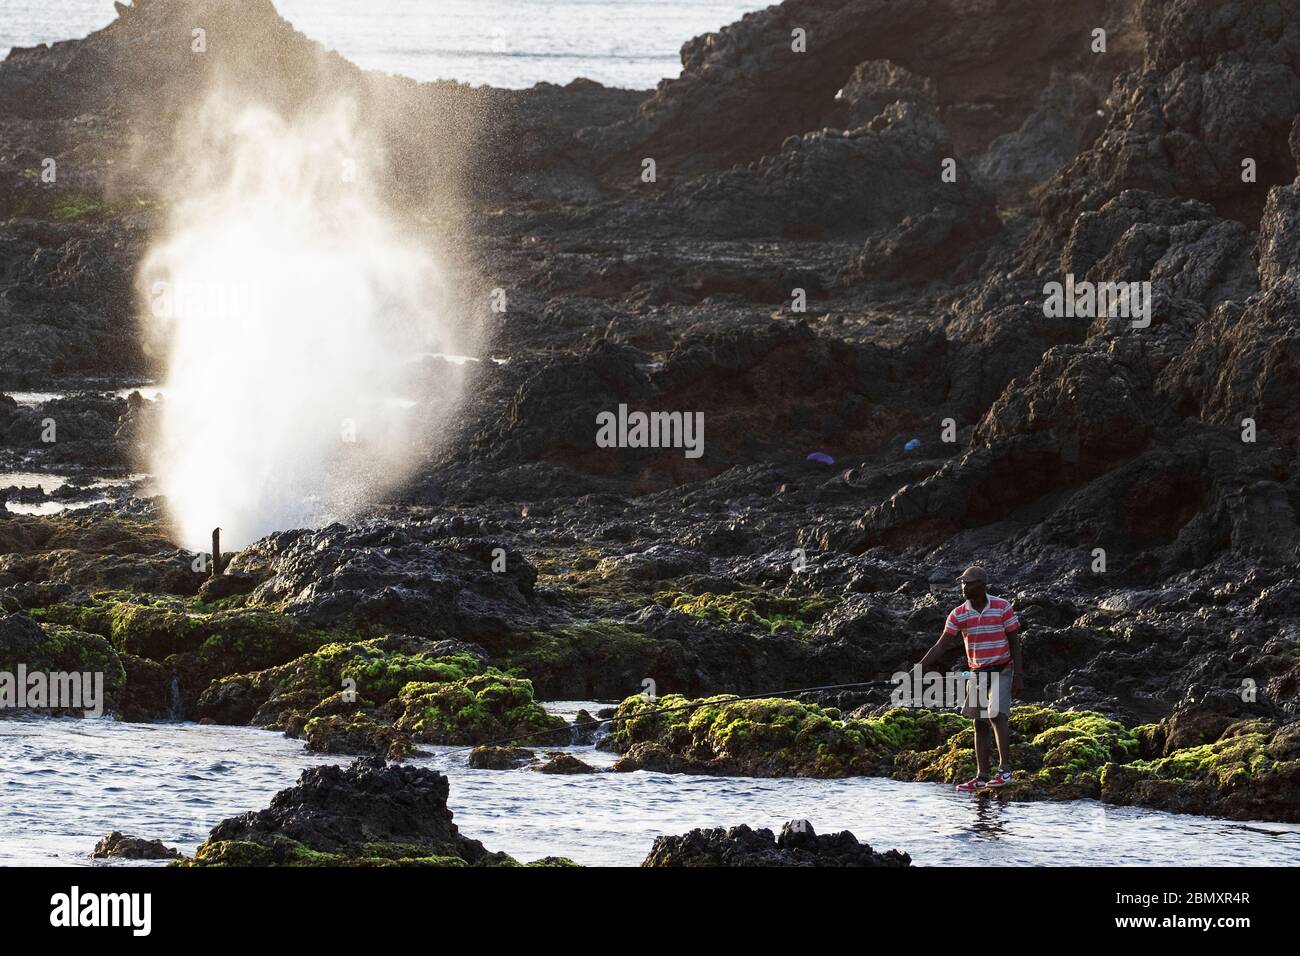 Fisherman and waves breaking on volcanic rocks in the surf at the headland Ponta Temerosa on the island Santiago, Cape Verde / Cabo Verde Stock Photo